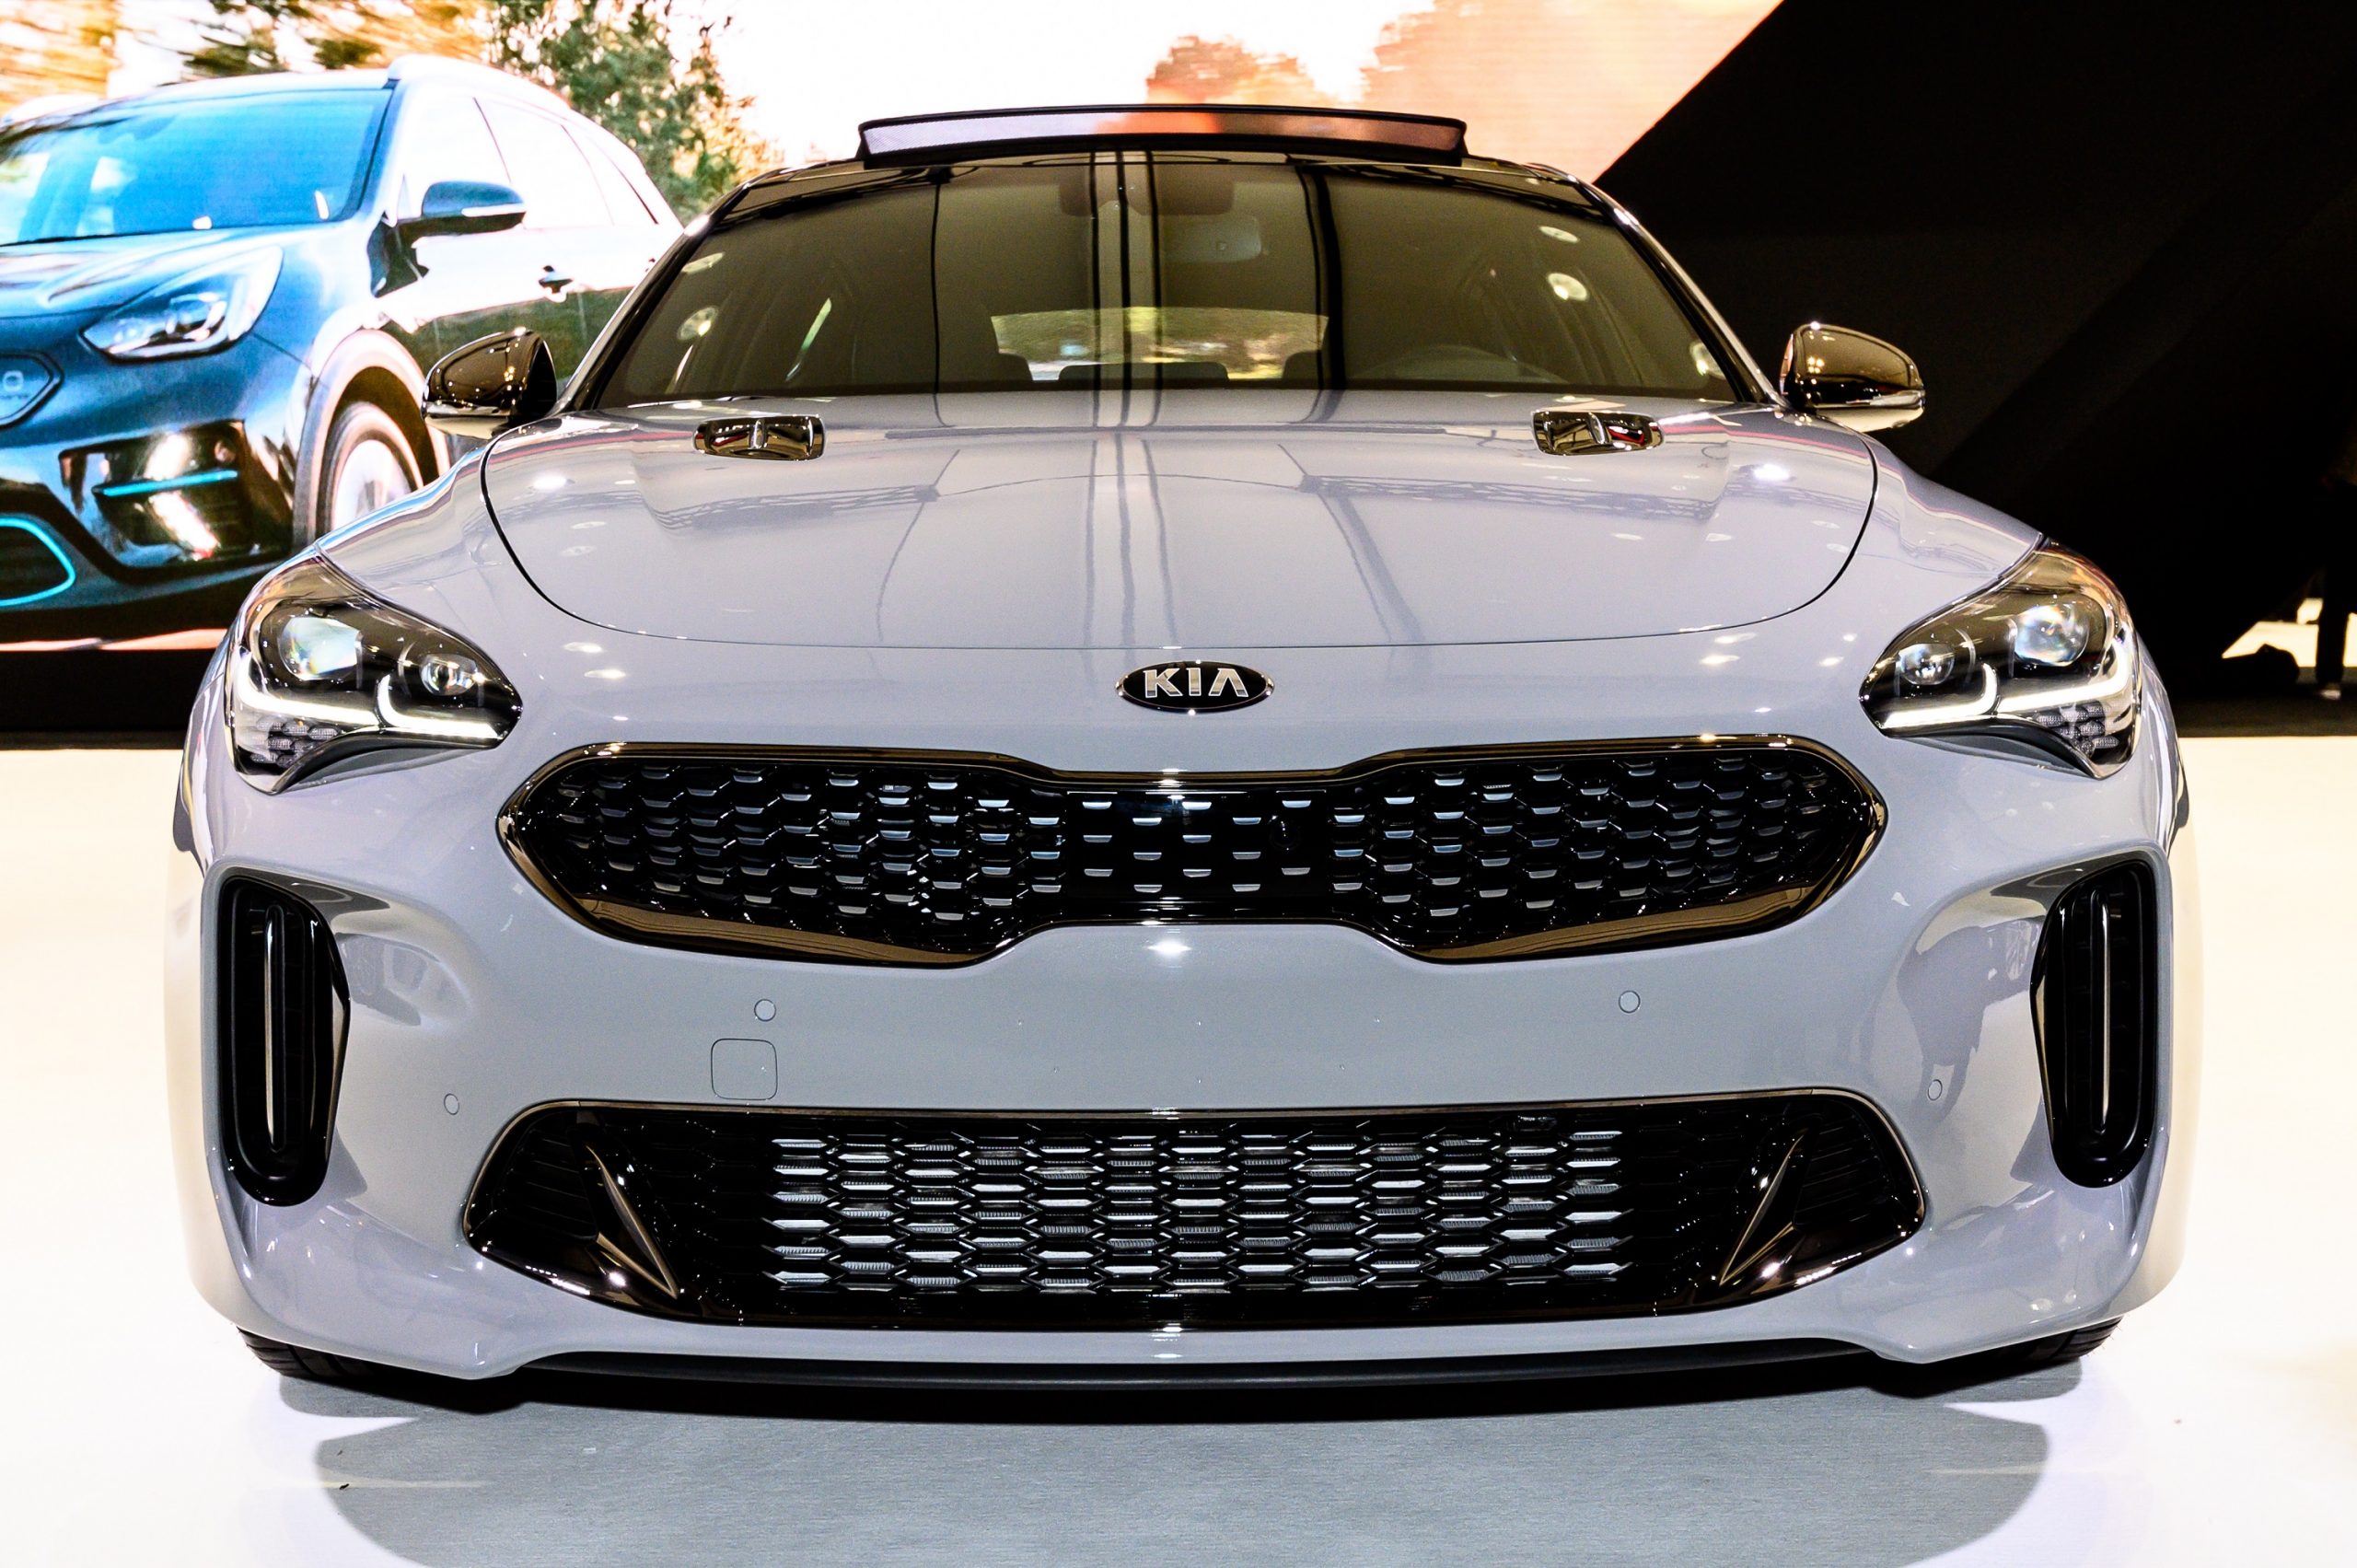 The 2022 Kia Stinger GT, shot from the front at an auto show in a pale grey paint